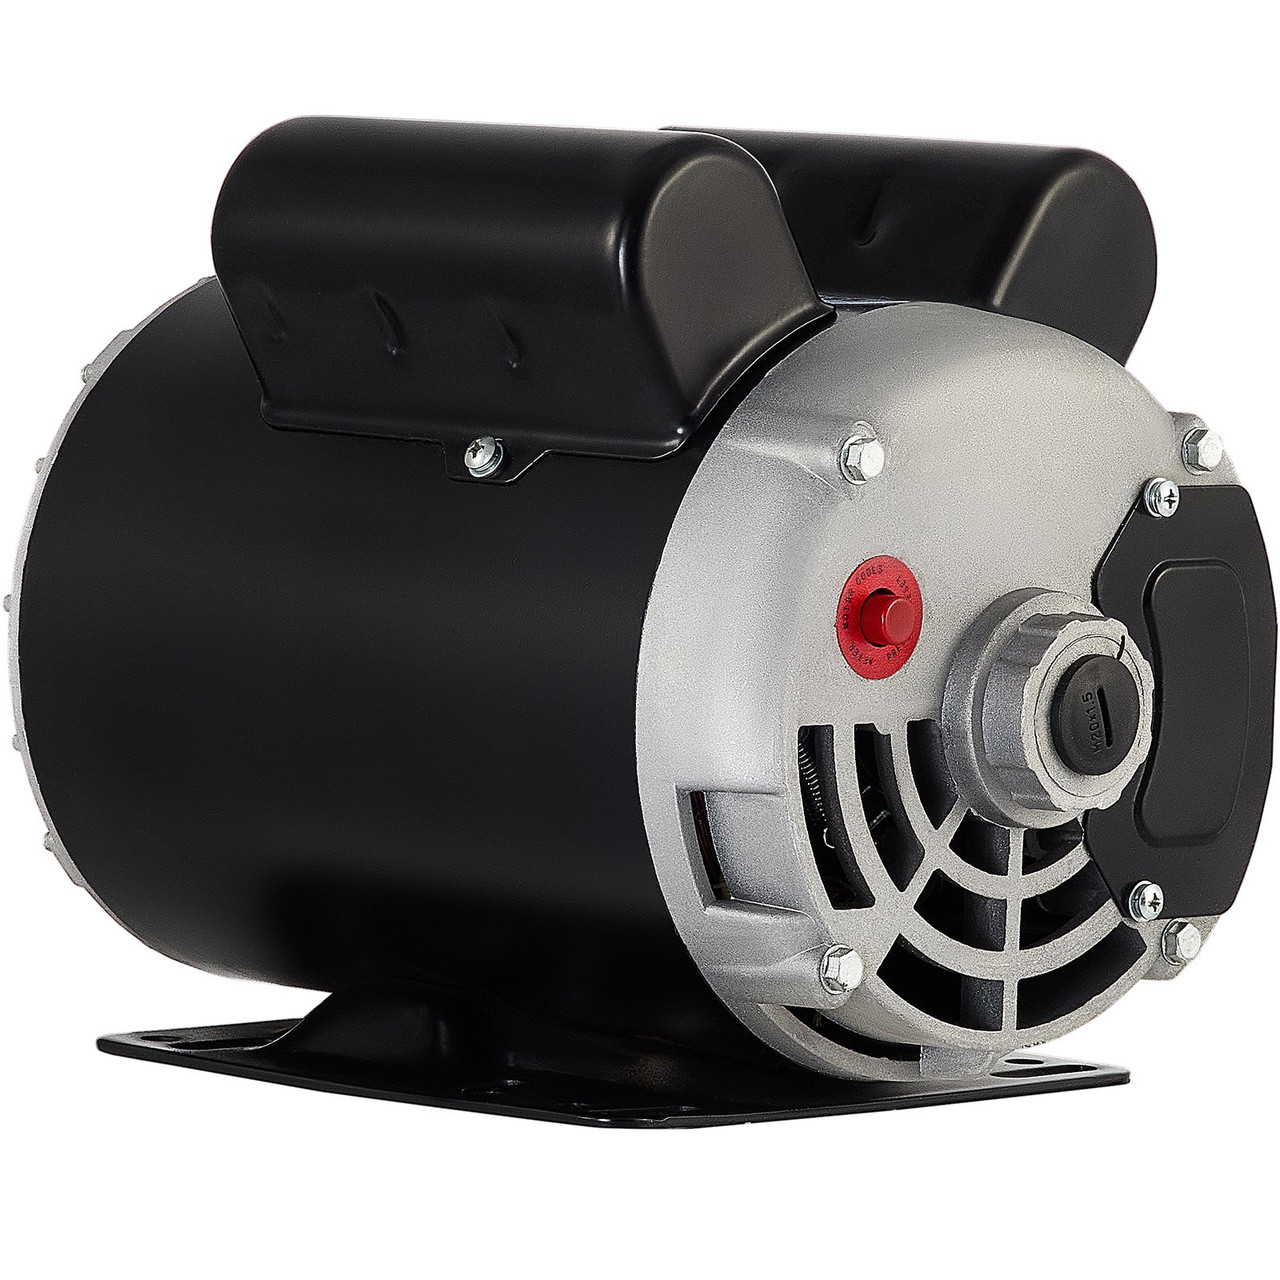 Air Compressor Electric Motor, 5 HP SPL 3450 RPM, 208-230 Volt 3.1 KW Single Phase, 56 Frame 5/8" Keyed Shaft 60 Hz, Commercial-Duty CCW Rotation,